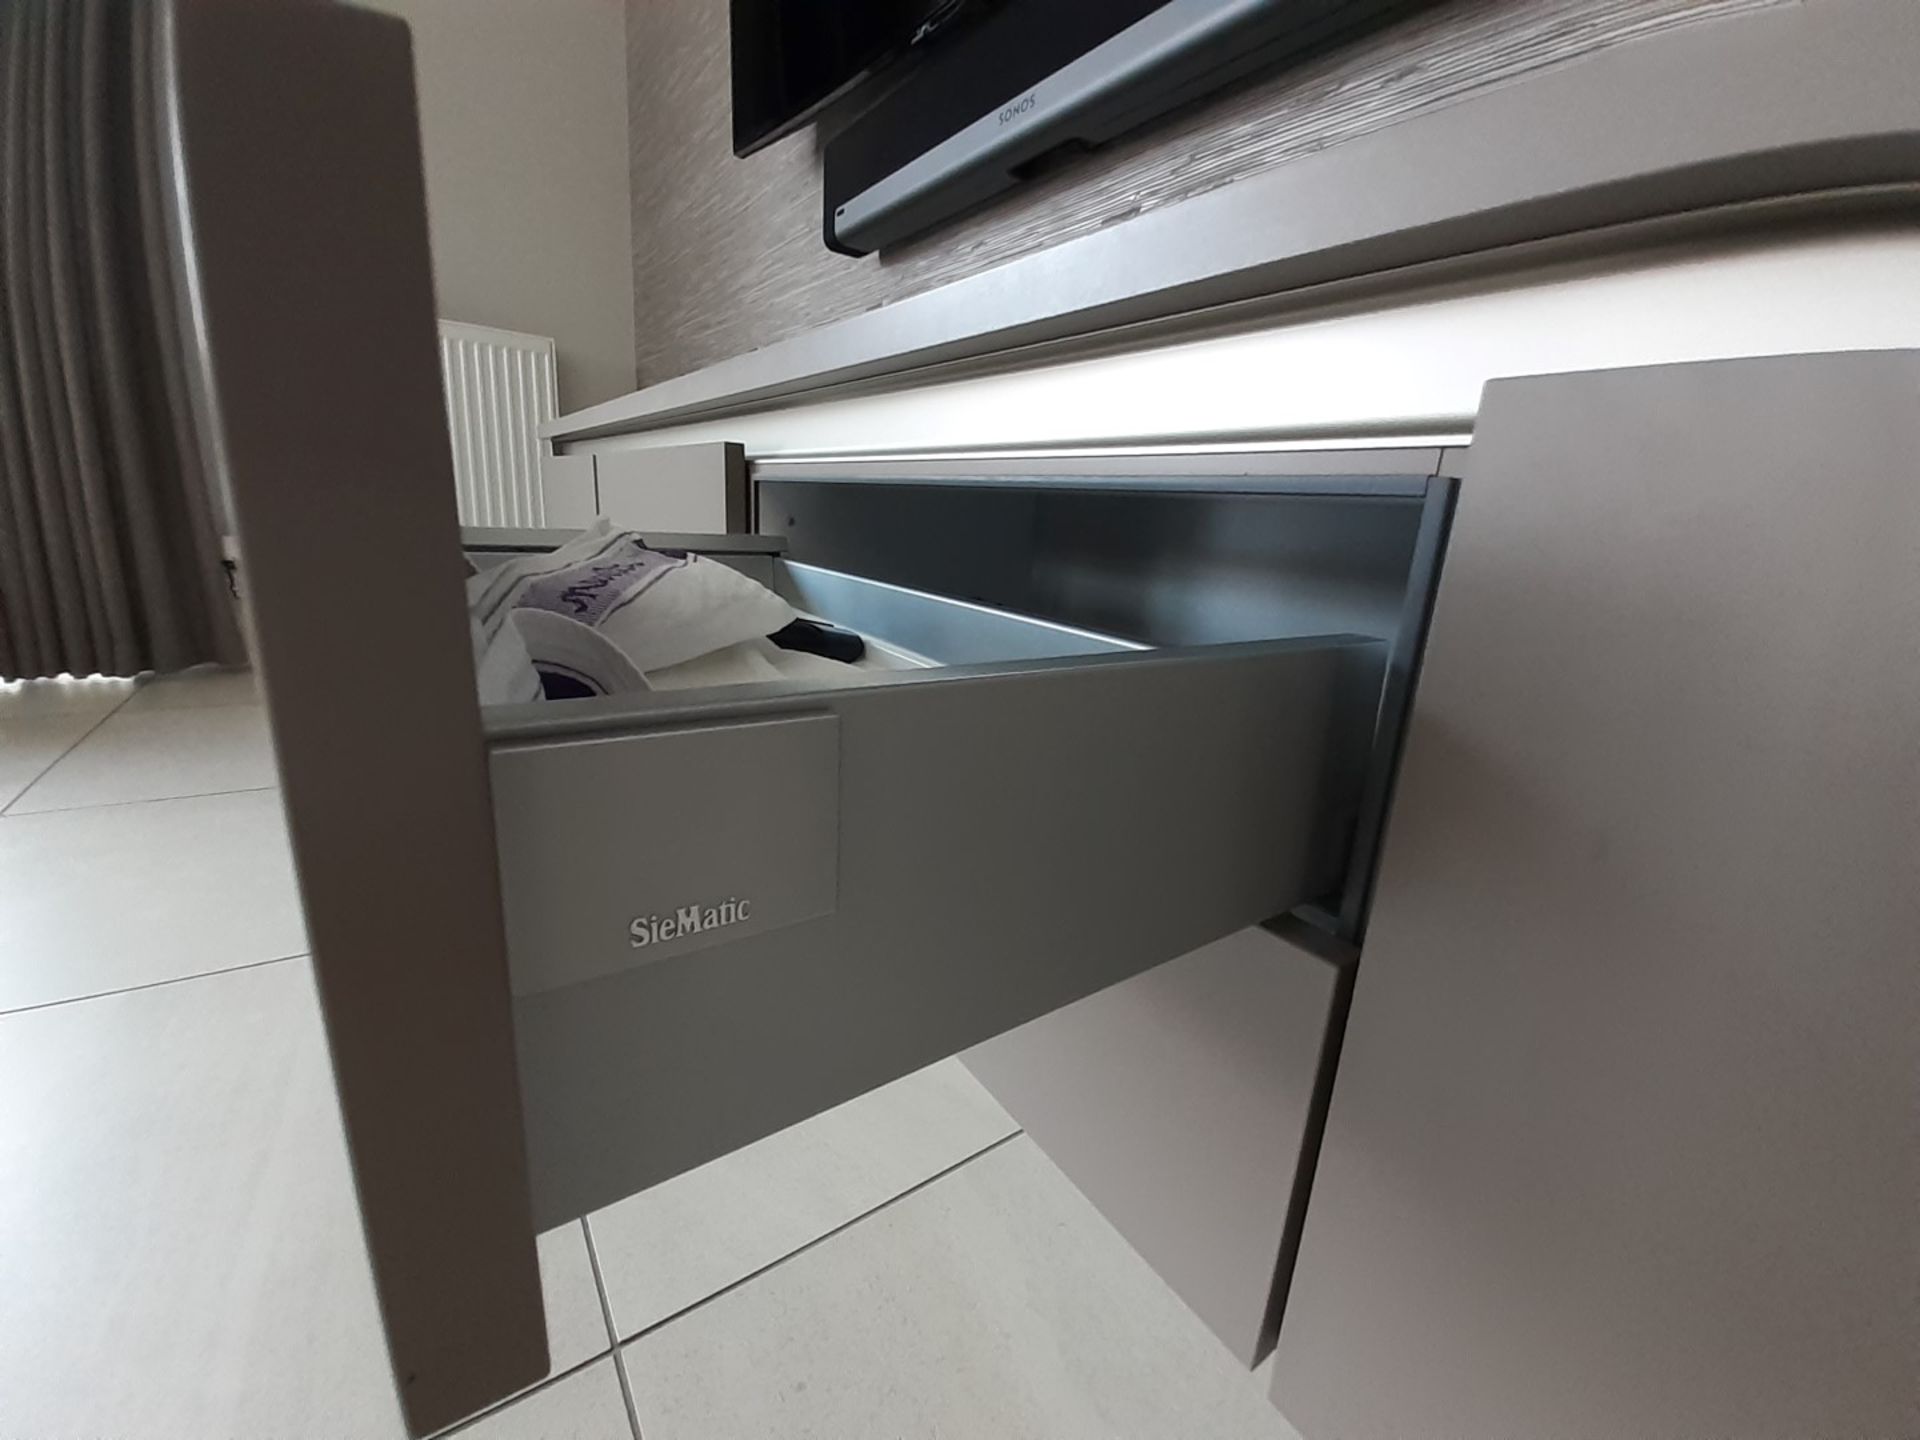 1 x SieMatic Handleless Fitted Kitchen With Intergrated NEFF Appliances, Corian Worktops And Island - Image 82 of 92